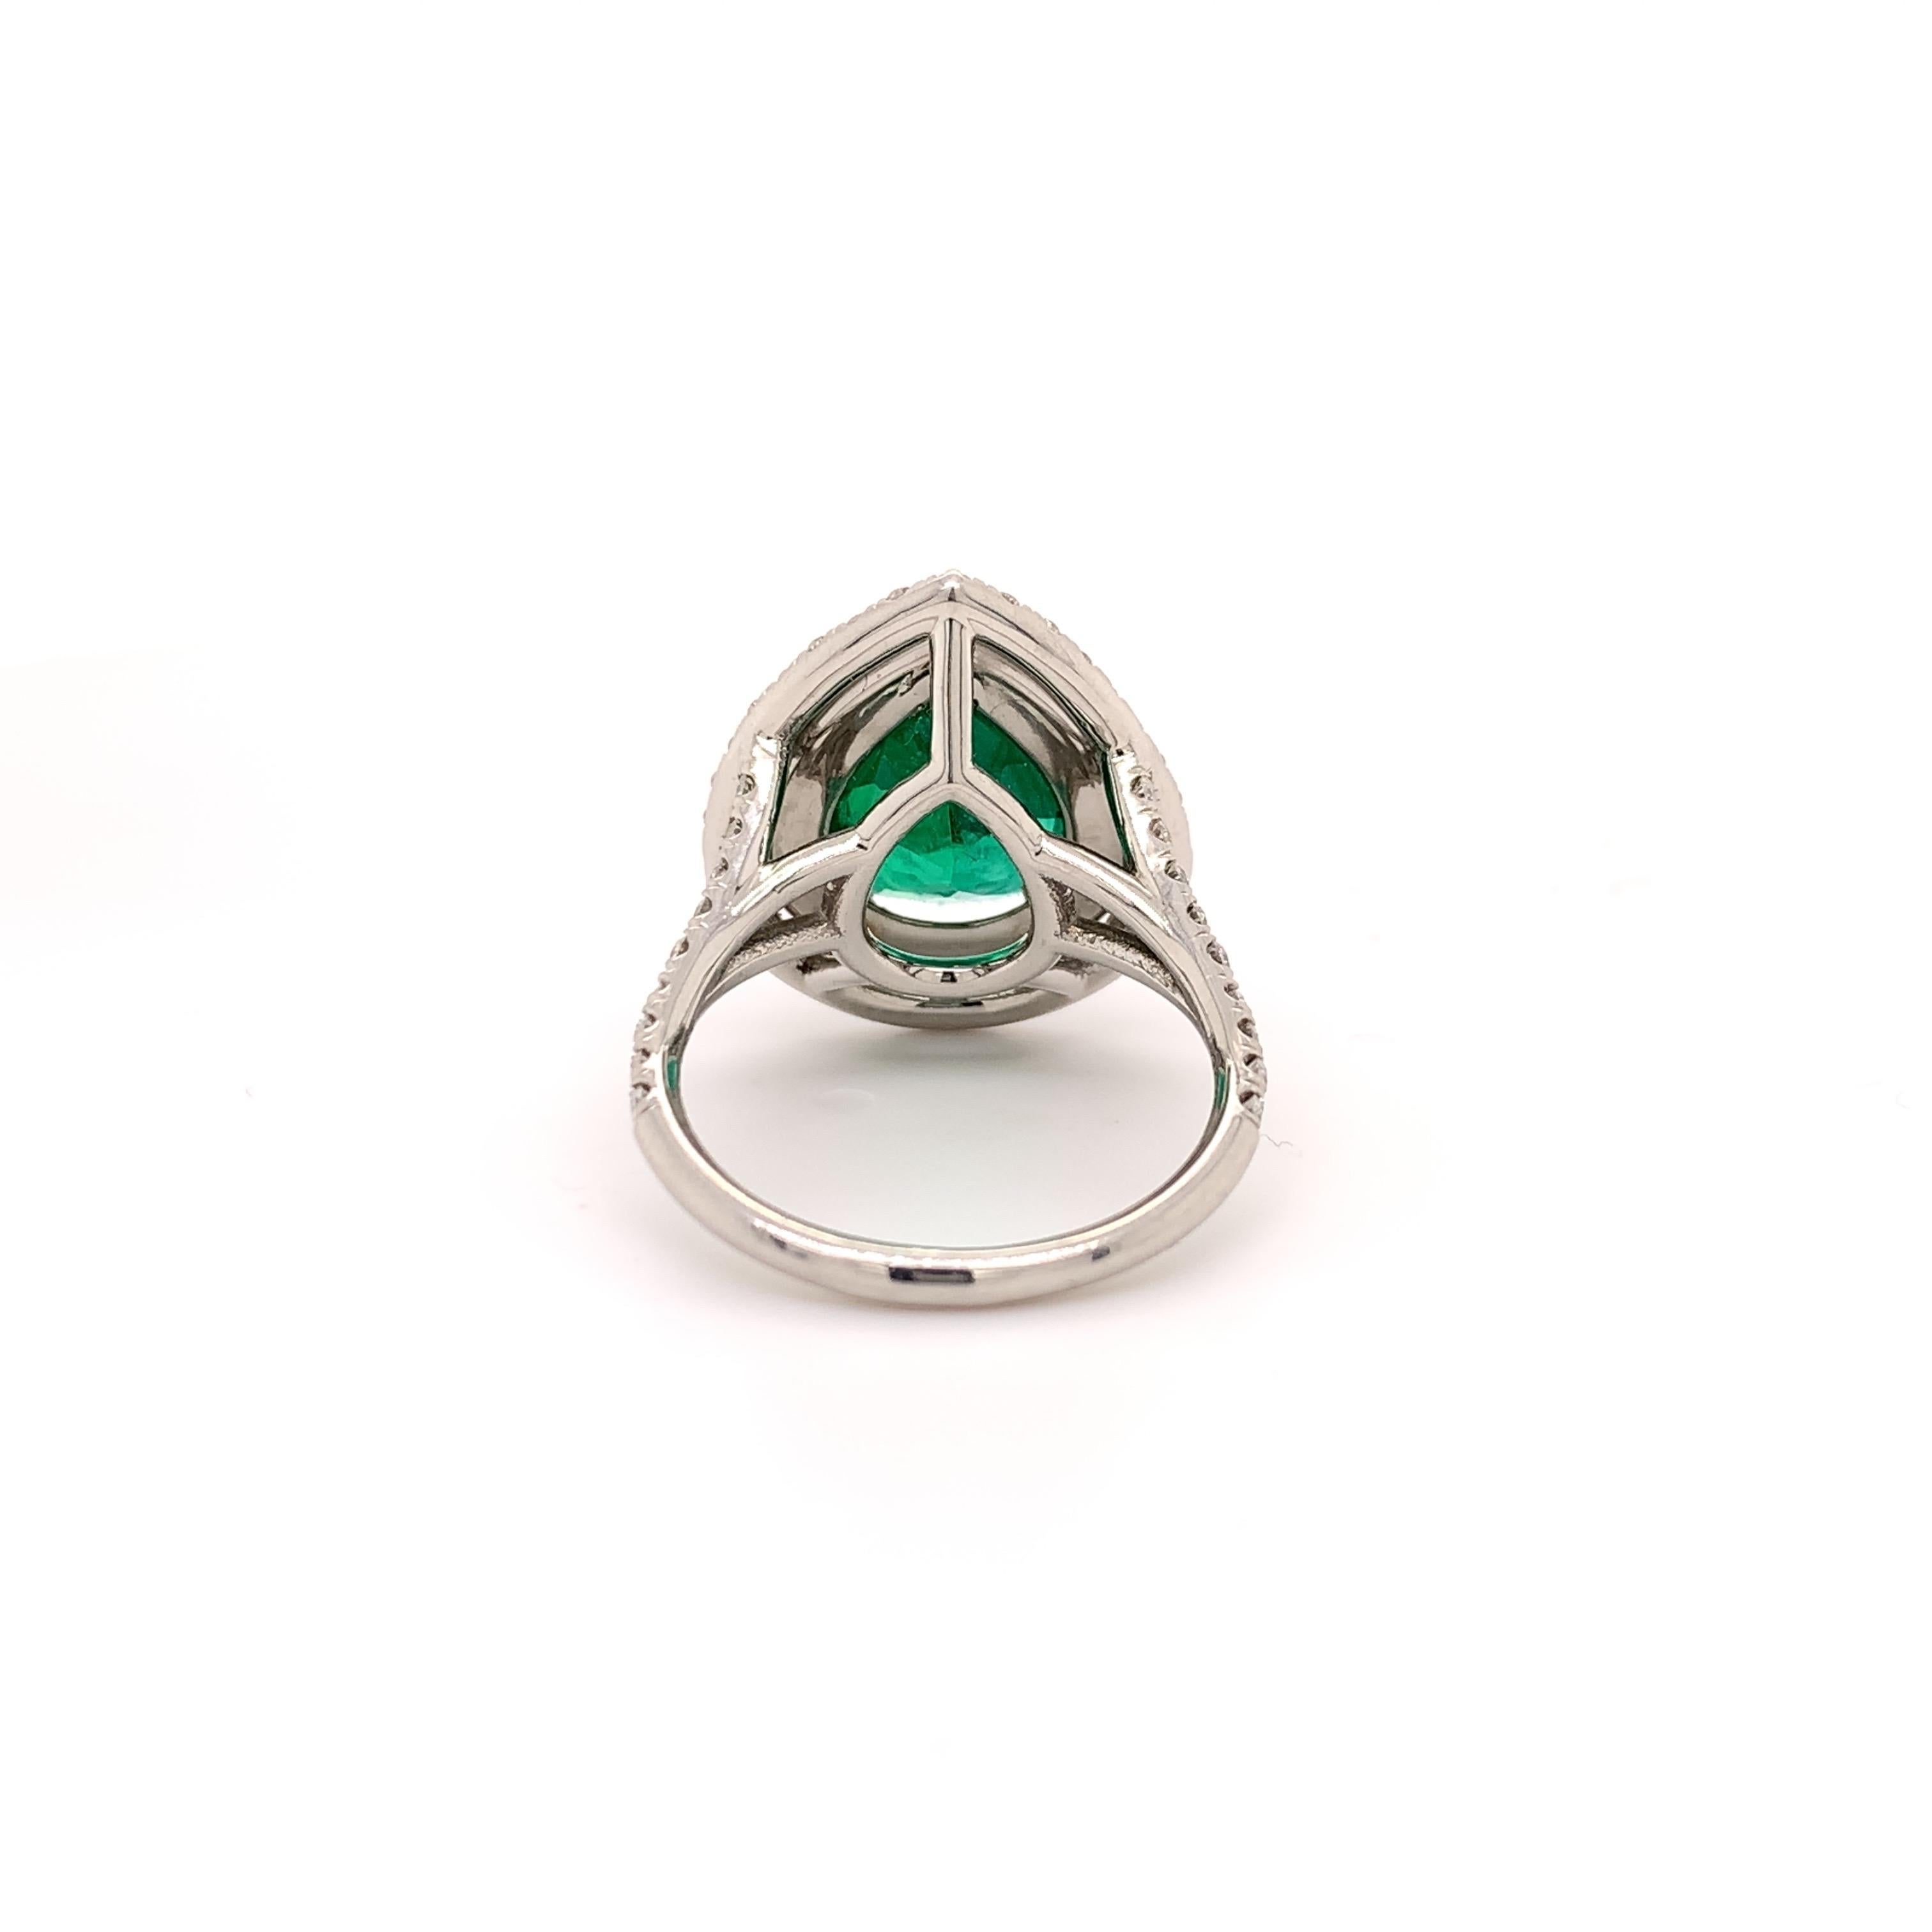 Contemporary GIA 3.37 Carat Zambian Emerald Ring For Sale